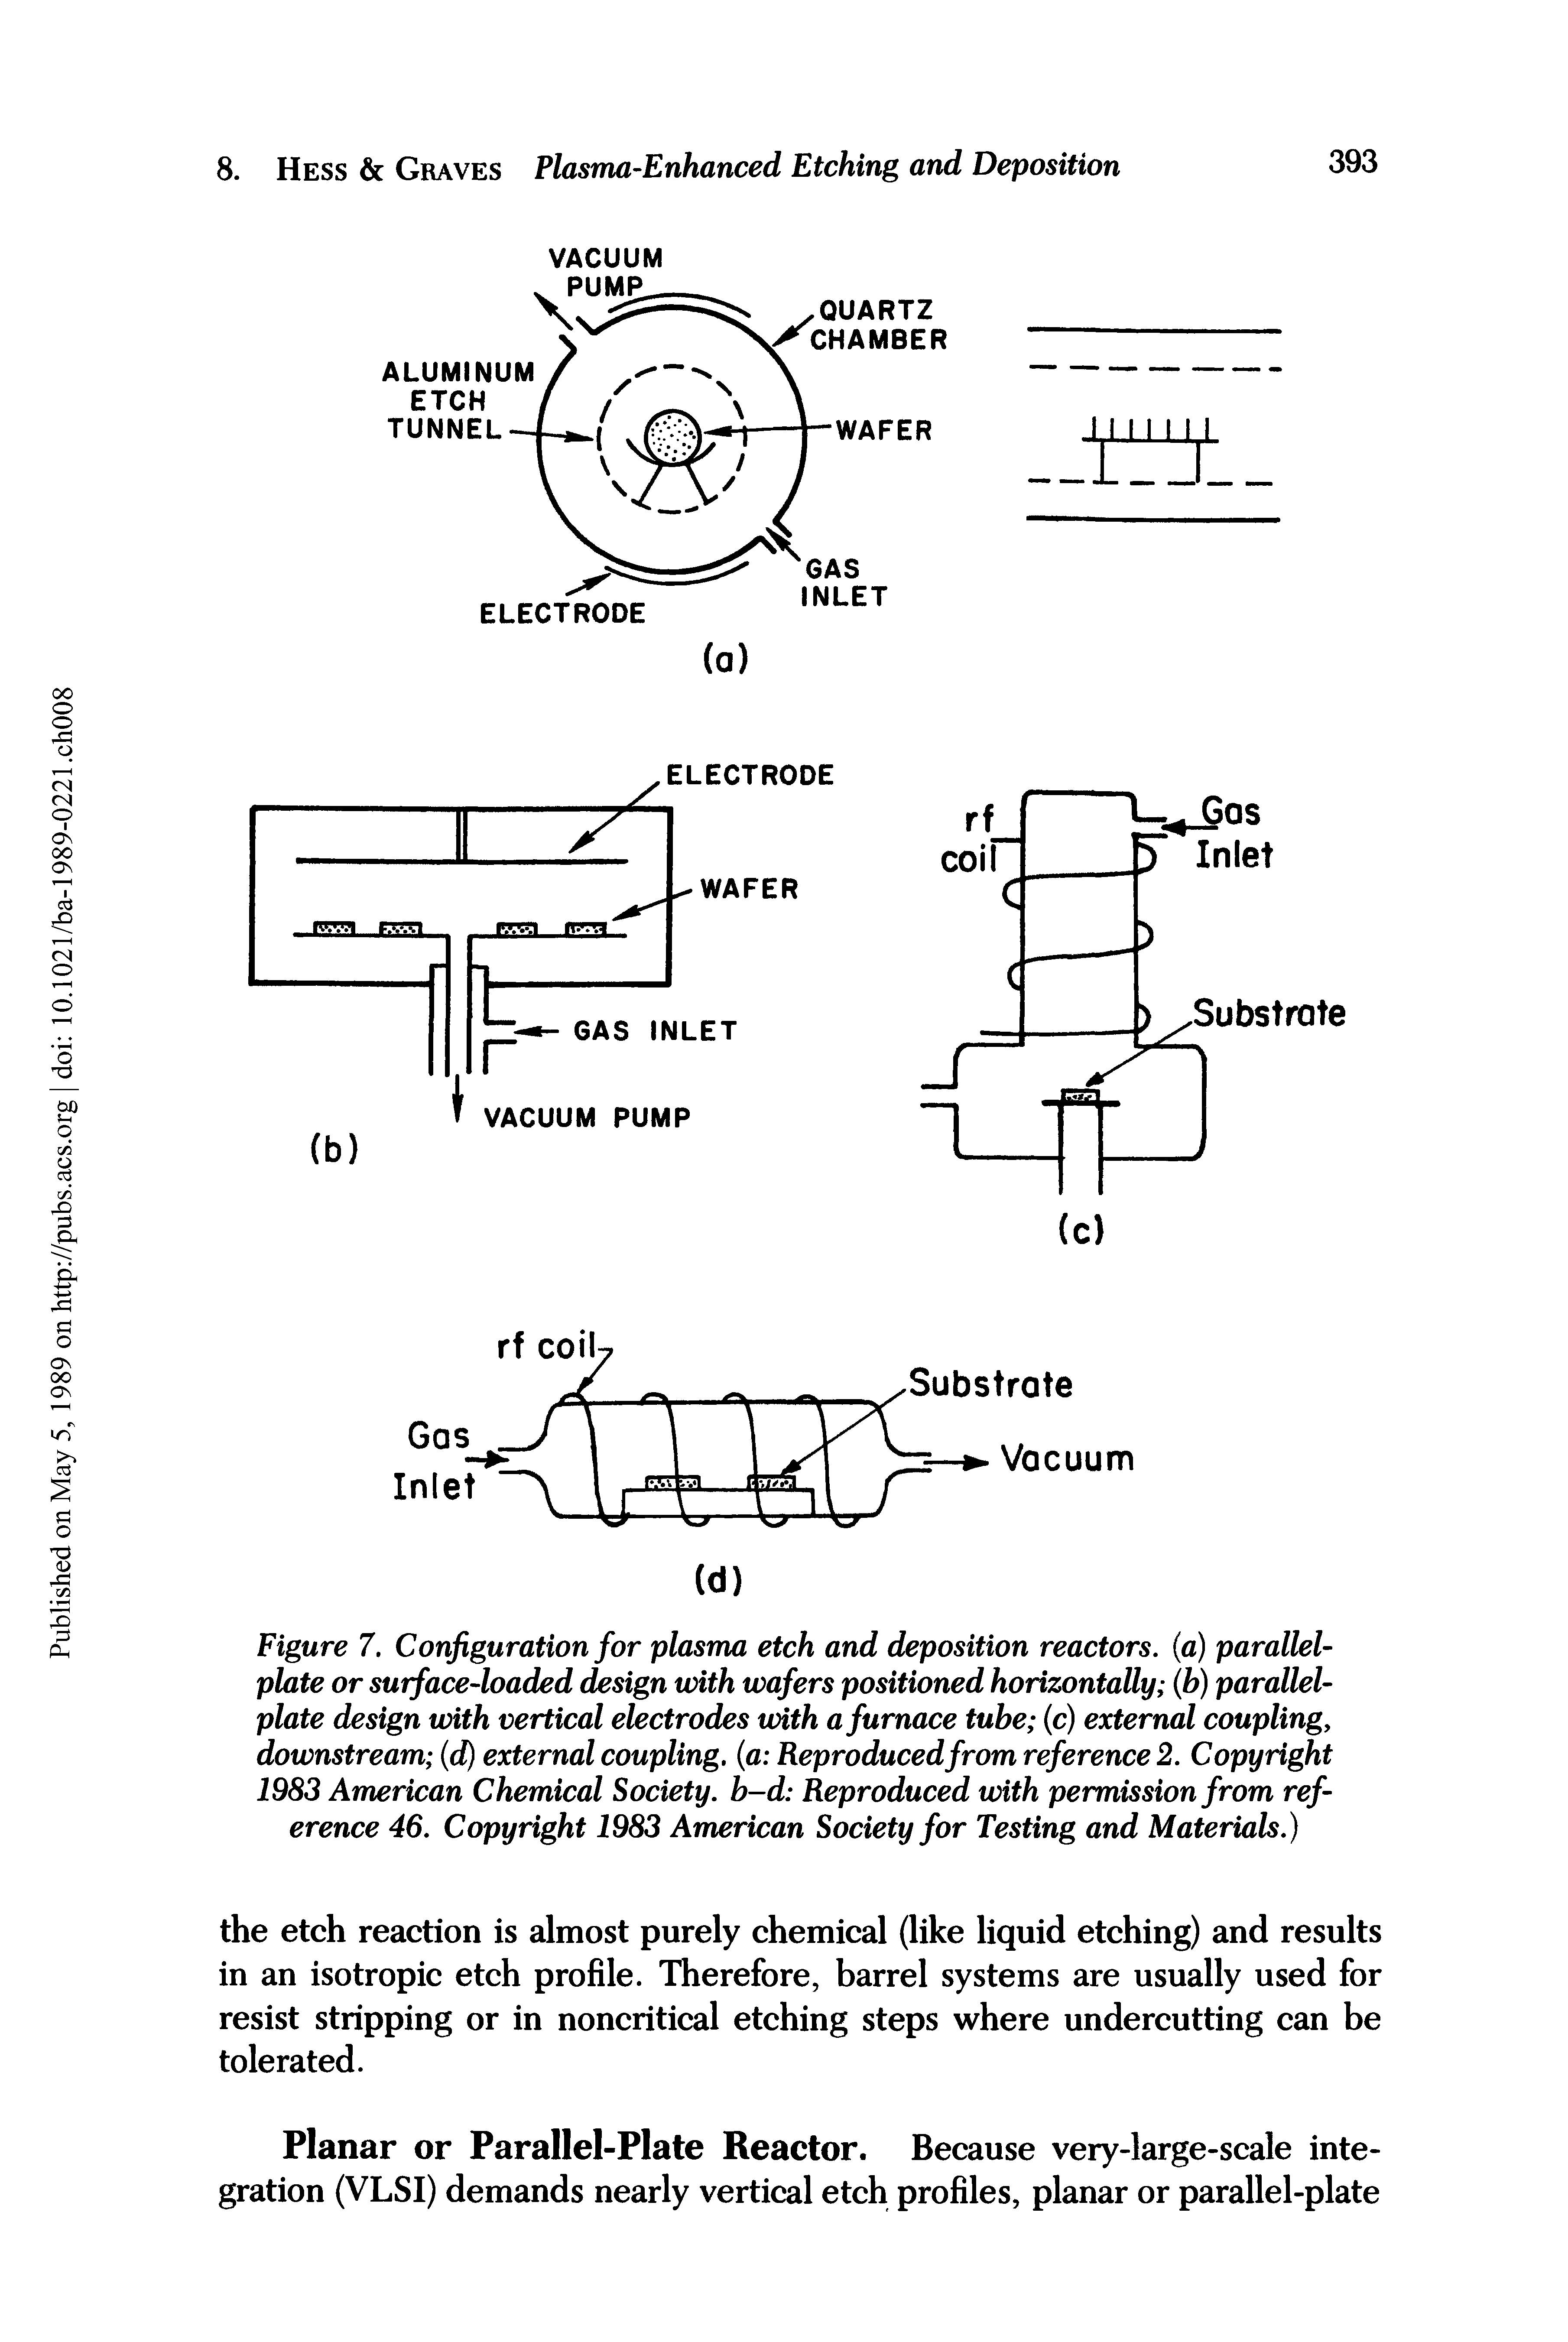 Figure 7. Configuration for plasma etch and deposition reactors, (a) parallel-plate or surface-loaded design with wafers positioned horizontally (h) parallel-plate design with vertical electrodes with a furnace tube (c) external coupling, downstream (d) external coupling, (a Reproduced from reference 2. Copyright 1983 American Chemical Society, b-d Reproduced with permission from reference 46. Copyright 1983 American Society for Testing and Materials.)...